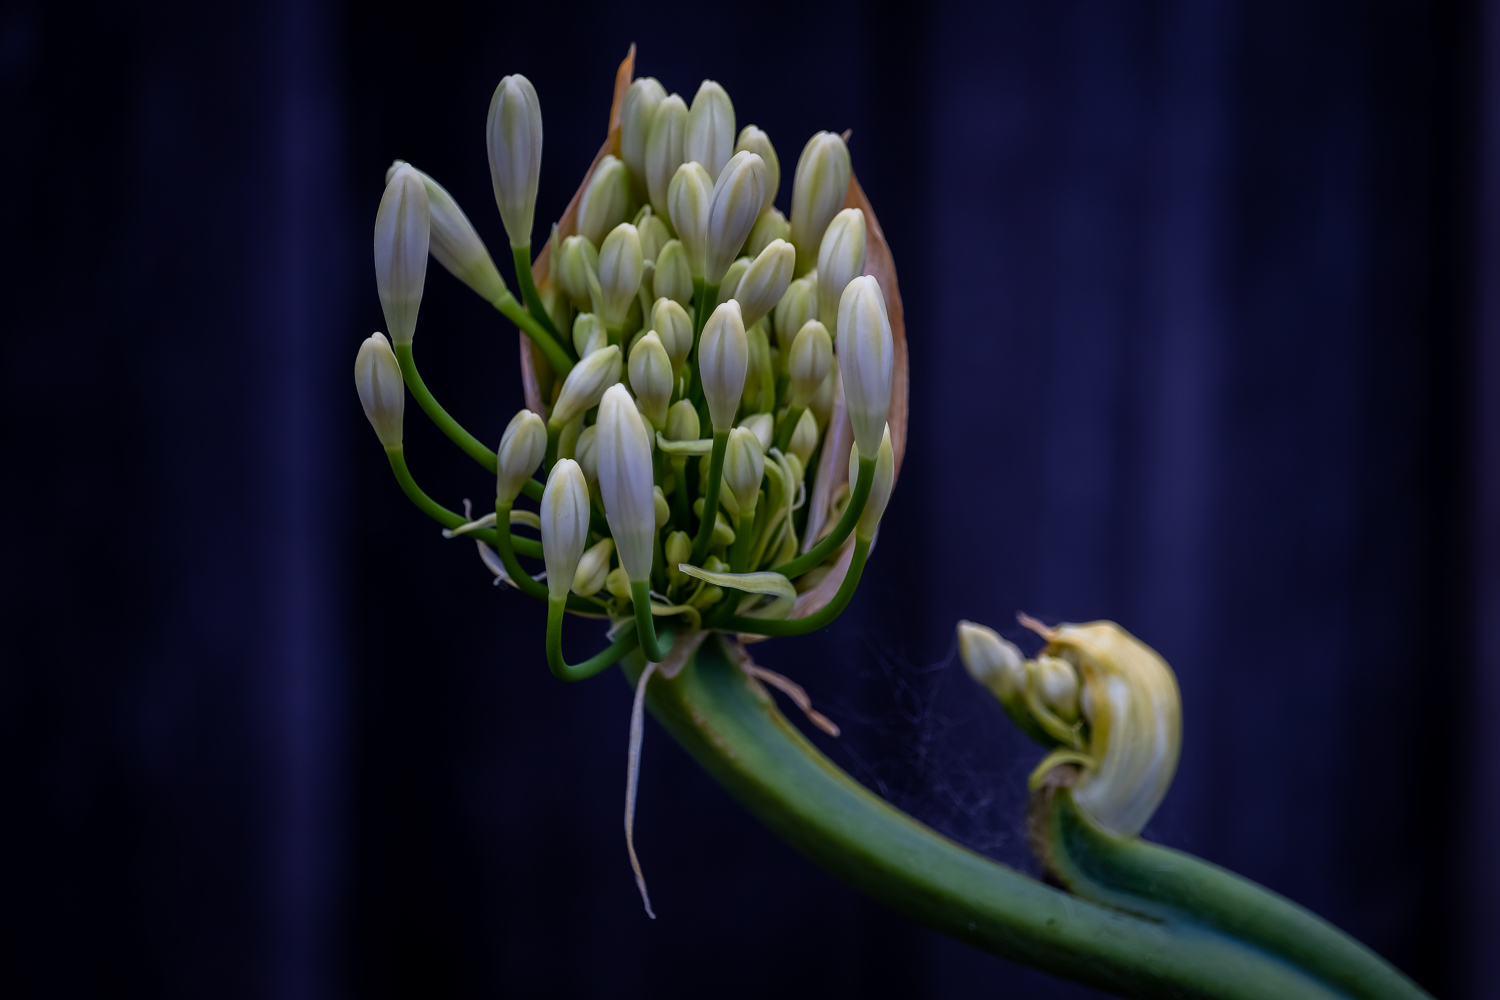 A blooming agapanthus flower with a small bud beneath it